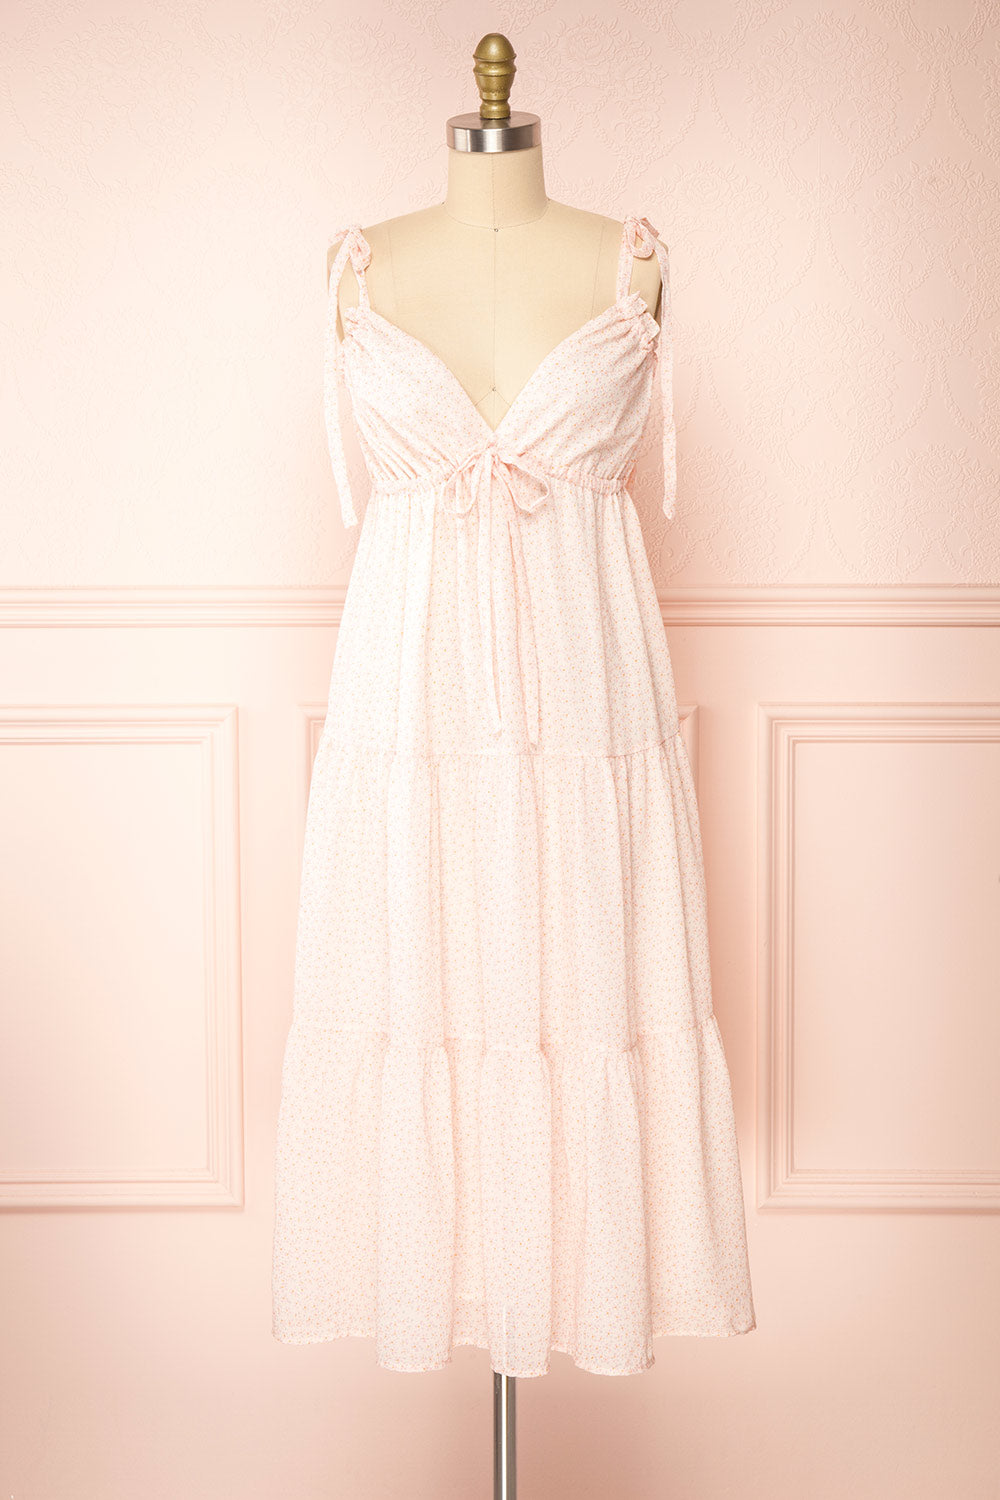 Demelza Pink Tiered Midi Dress w/ Tied Straps | Boutique 1861 front view